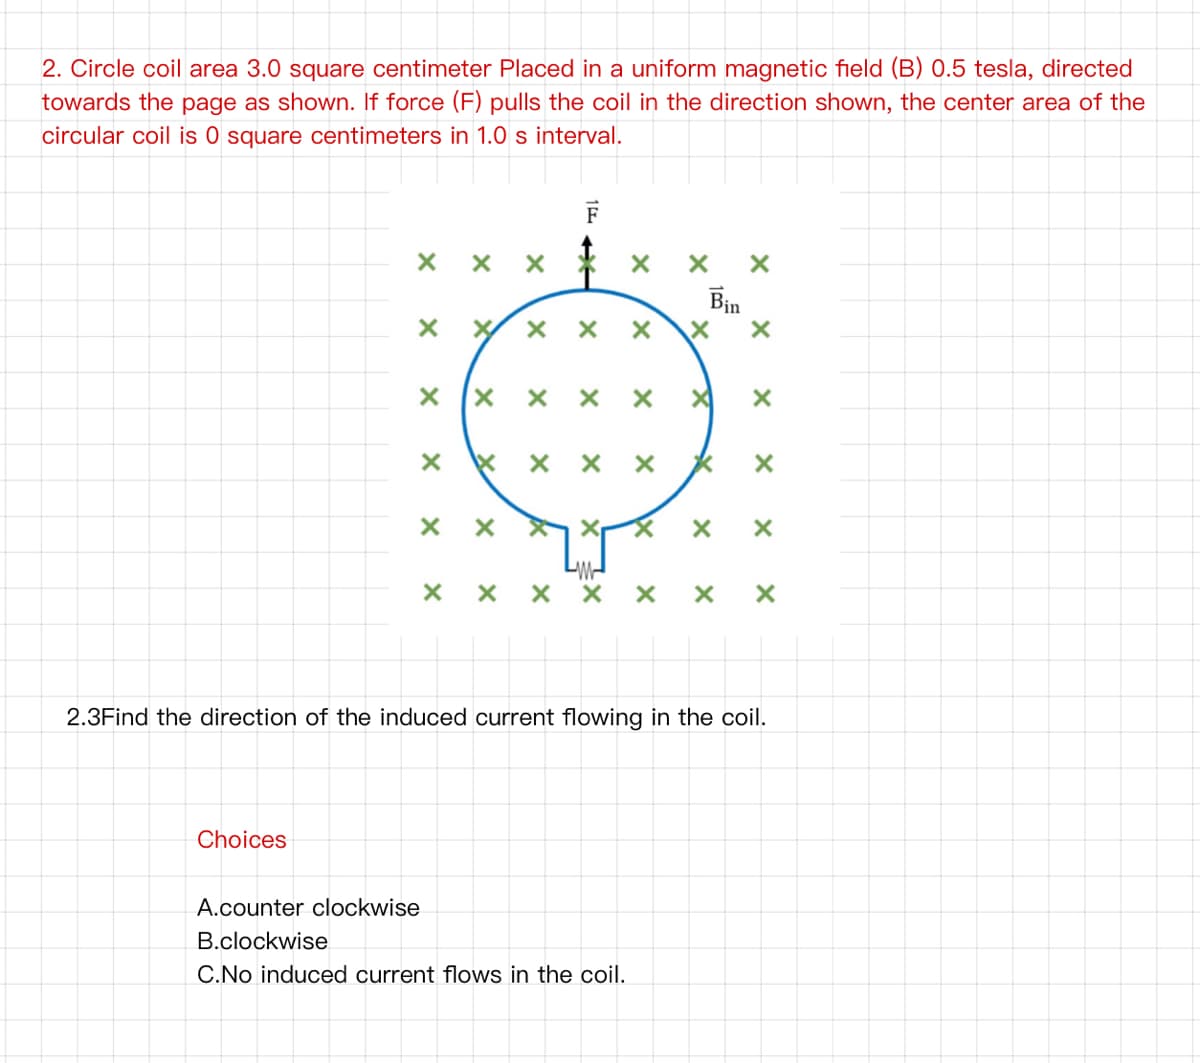 2. Circle coil area 3.0 square centimeter Placed in a uniform magnetic field (B) 0.5 tesla, directed
towards the page as shown. If force (F) pulls the coil in the direction shown, the center area of the
circular coil is 0 square centimeters in 1.0 s interval.
F
Bin
X x x *
2.3Find the direction of the induced current flowing in the coil.
Choices
A.counter clockwise
B.clockwise
C.No induced current flows in the coil.
